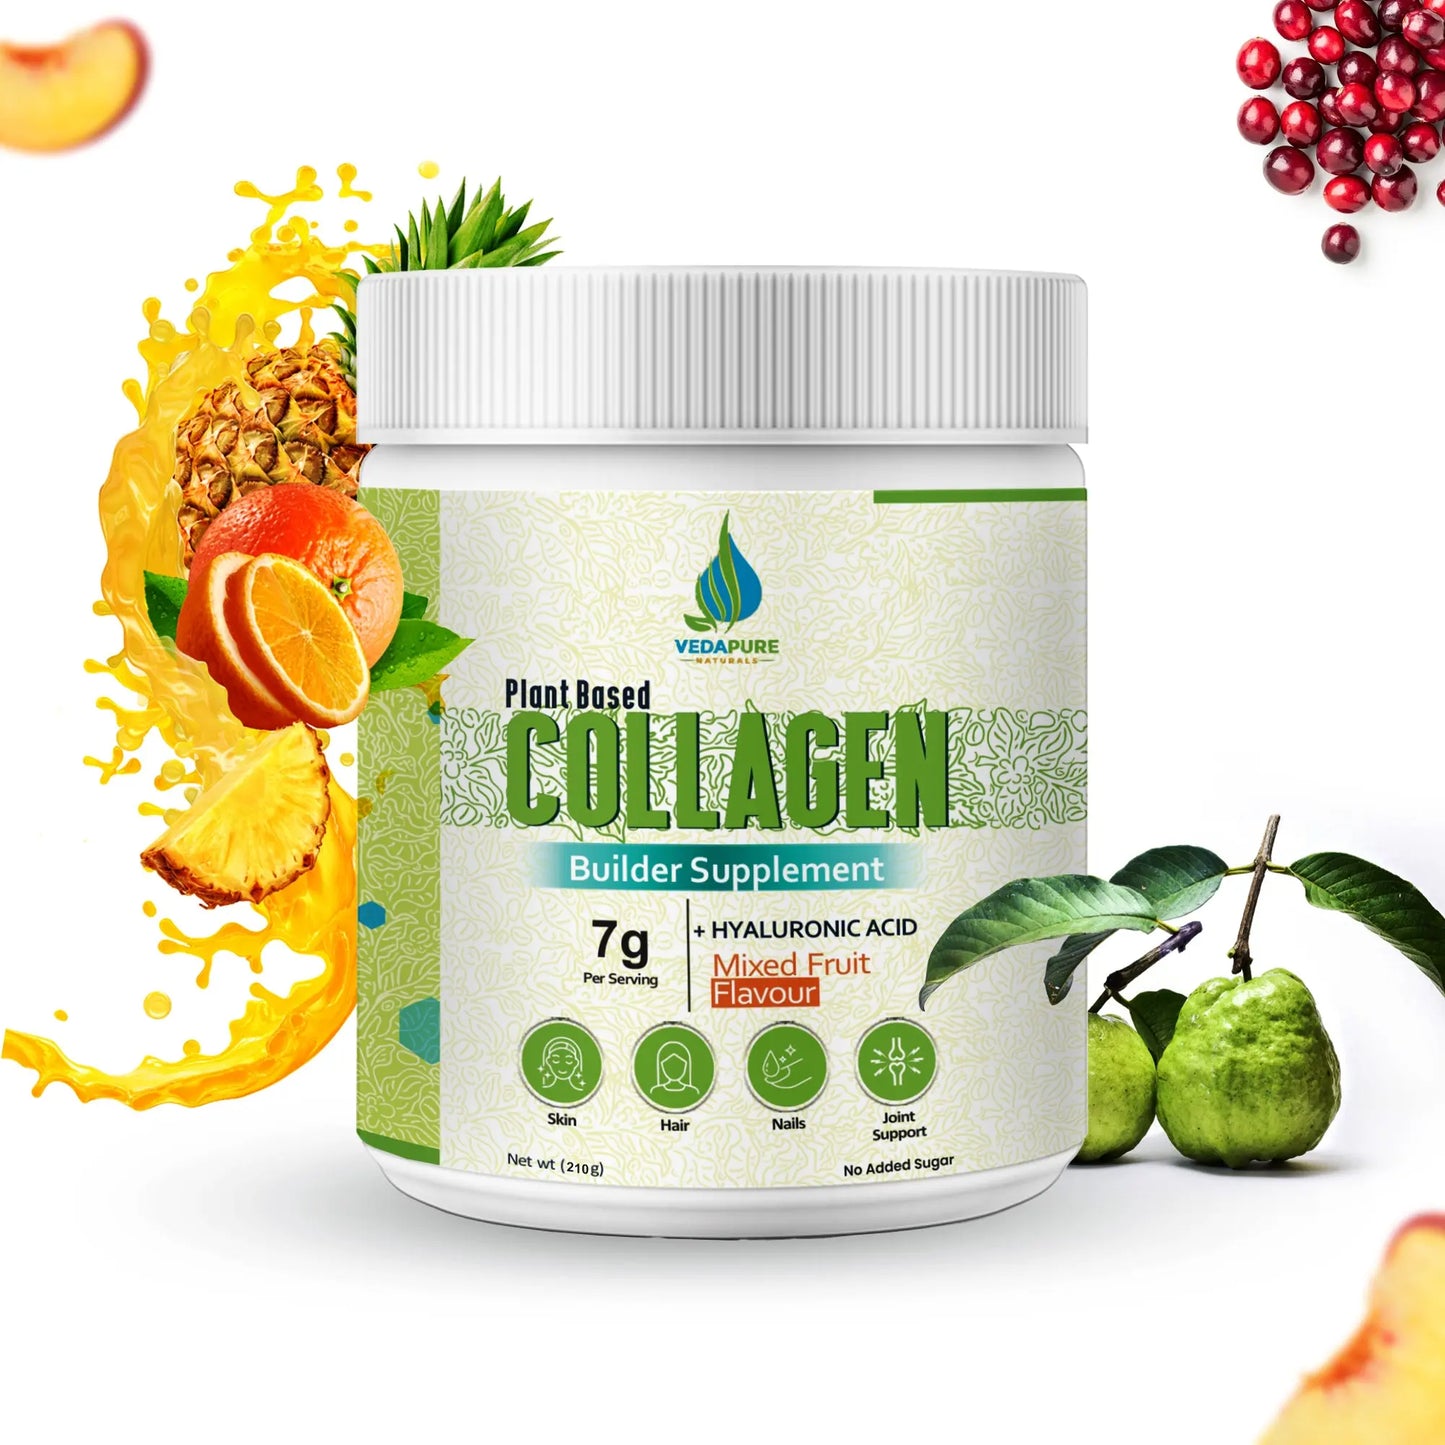 Vedapure Plant Based Skin Collagen Builder Supplement | Mixed Fruit, 210g| Skin Collagen Booster for Men & Women with Hyaluronic Acid, Biotion, Vitamin E & C | Healthy Skin, Joints, Hairs & Nails VedapureNaturals